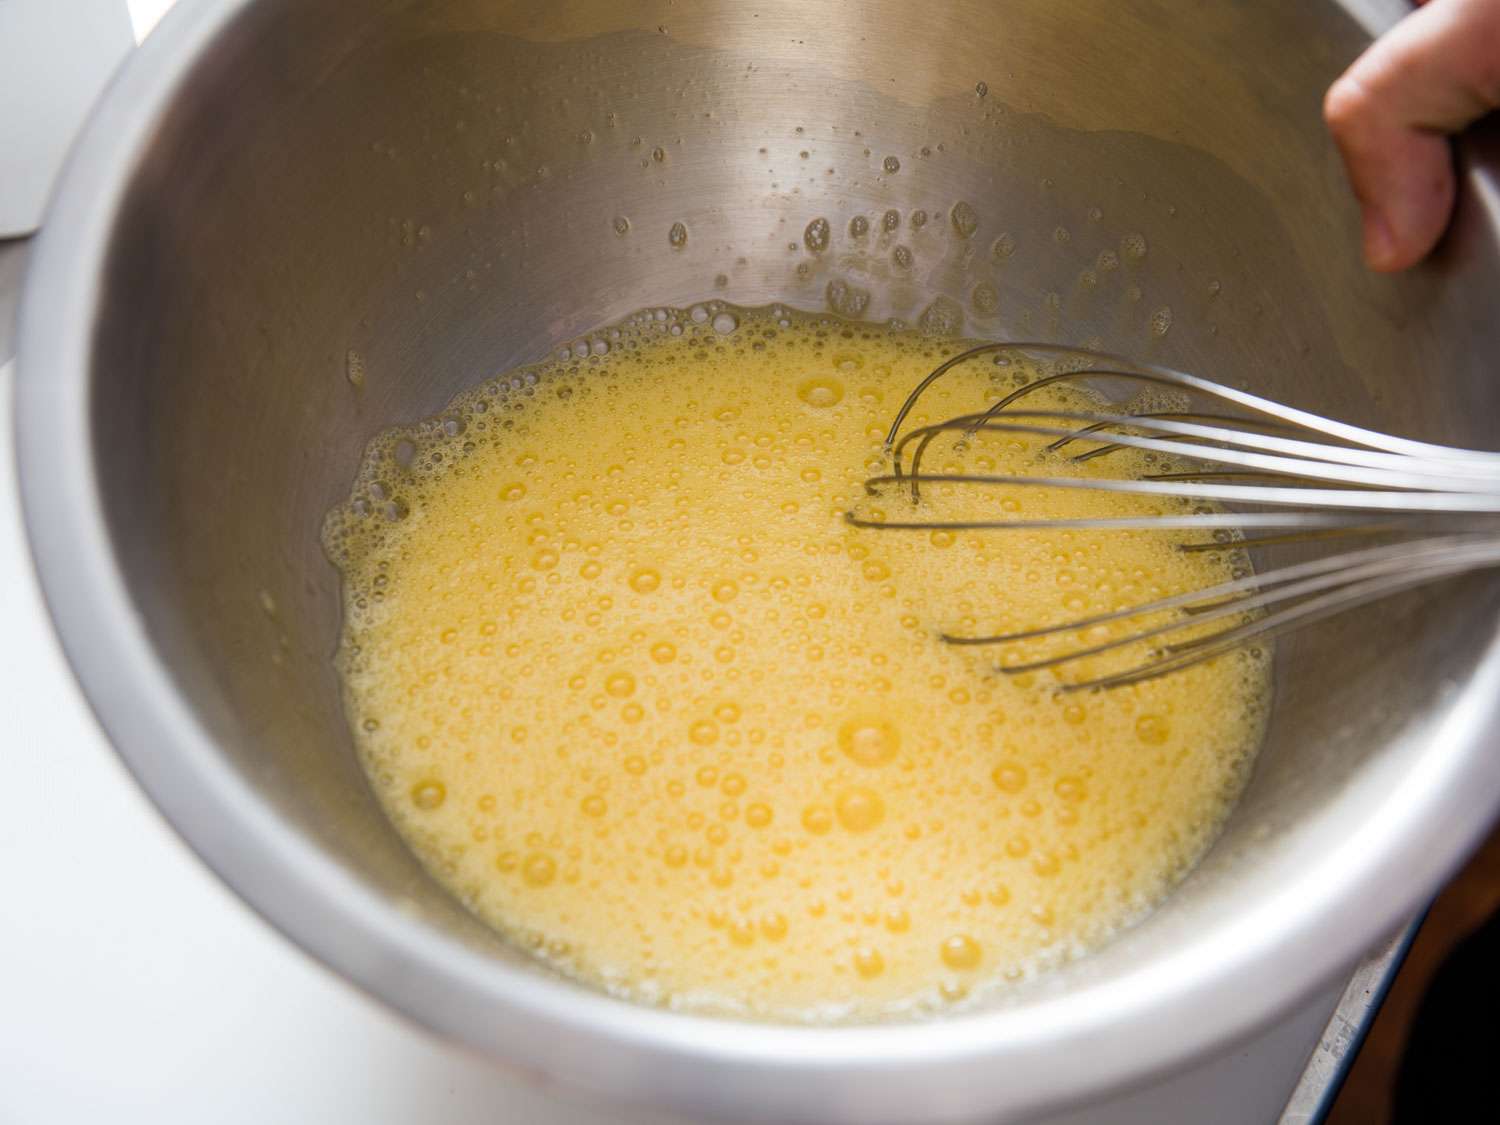 Beating eggs in a metal bowl with a whisk until frothy.